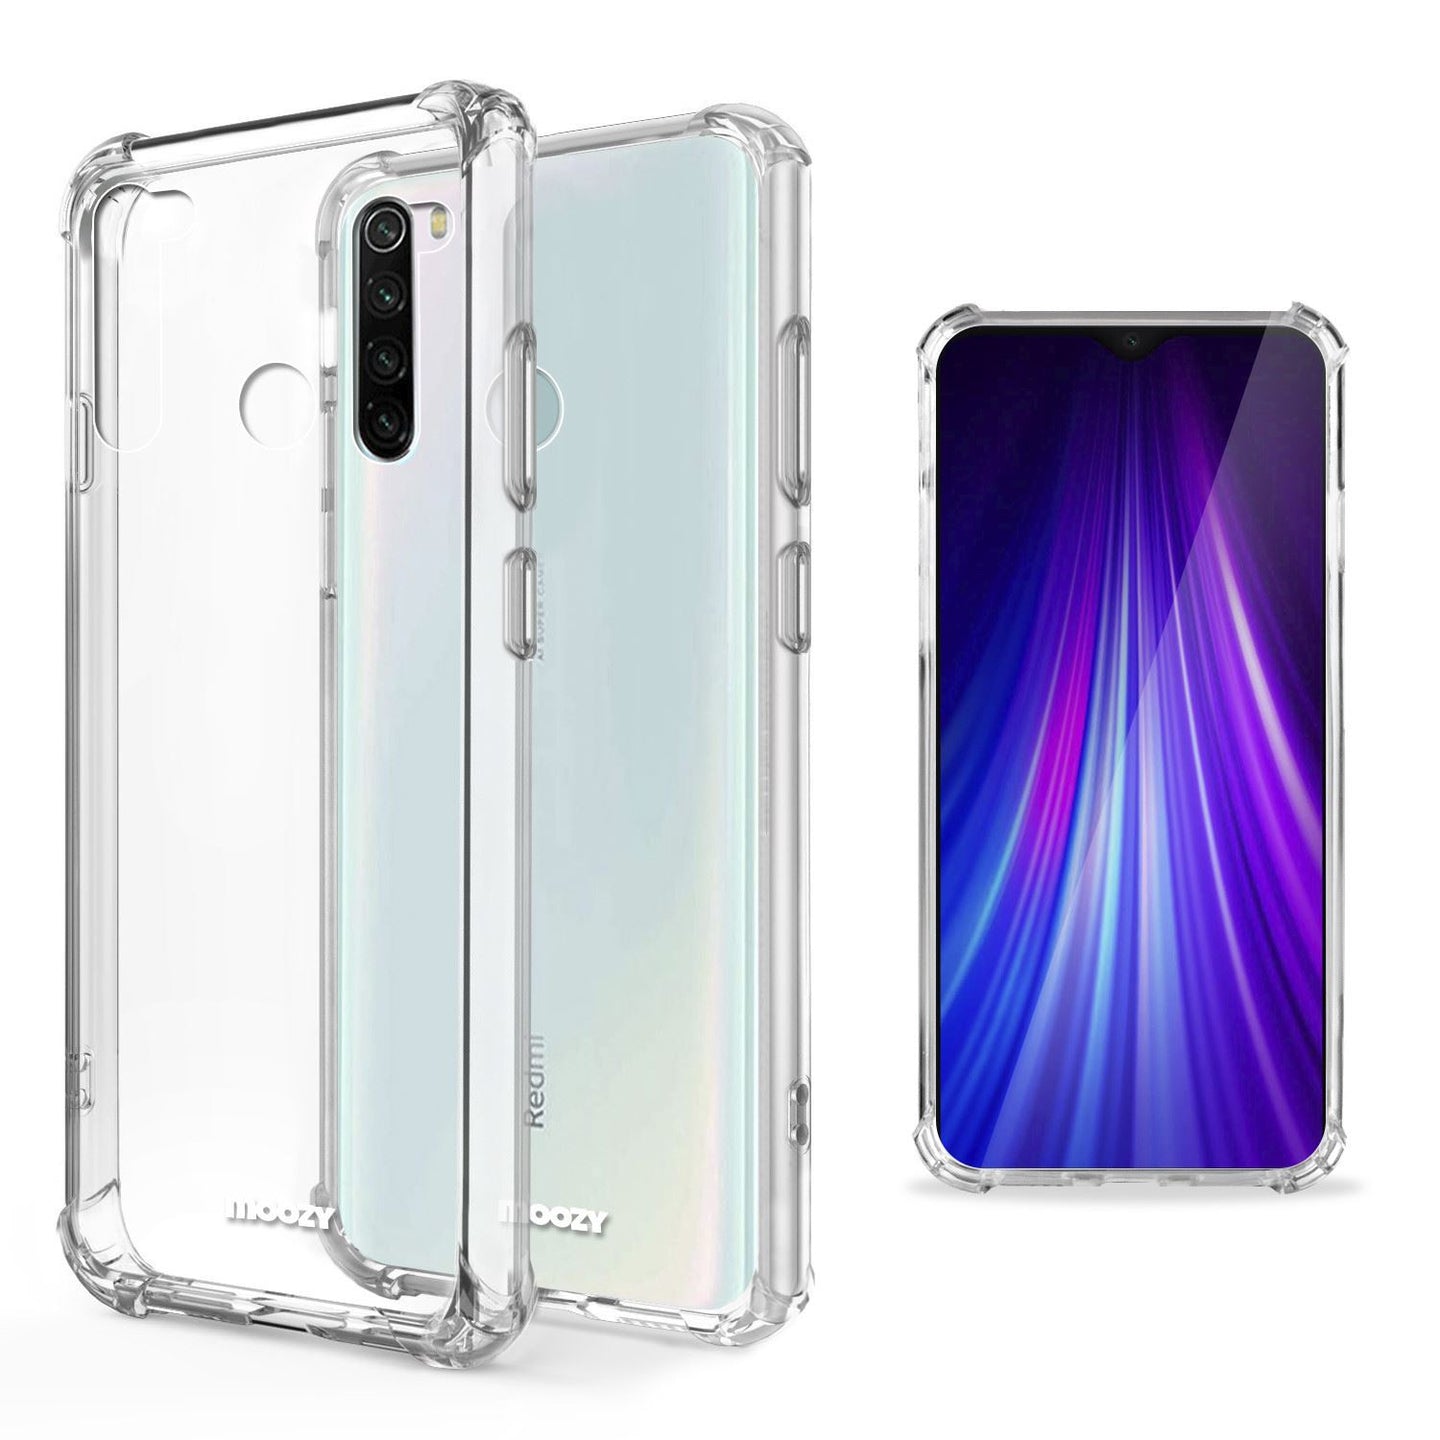 Moozy Shock Proof Silicone Case for Xiaomi Redmi Note 8 - Transparent Crystal Clear Phone Case Soft TPU Cover